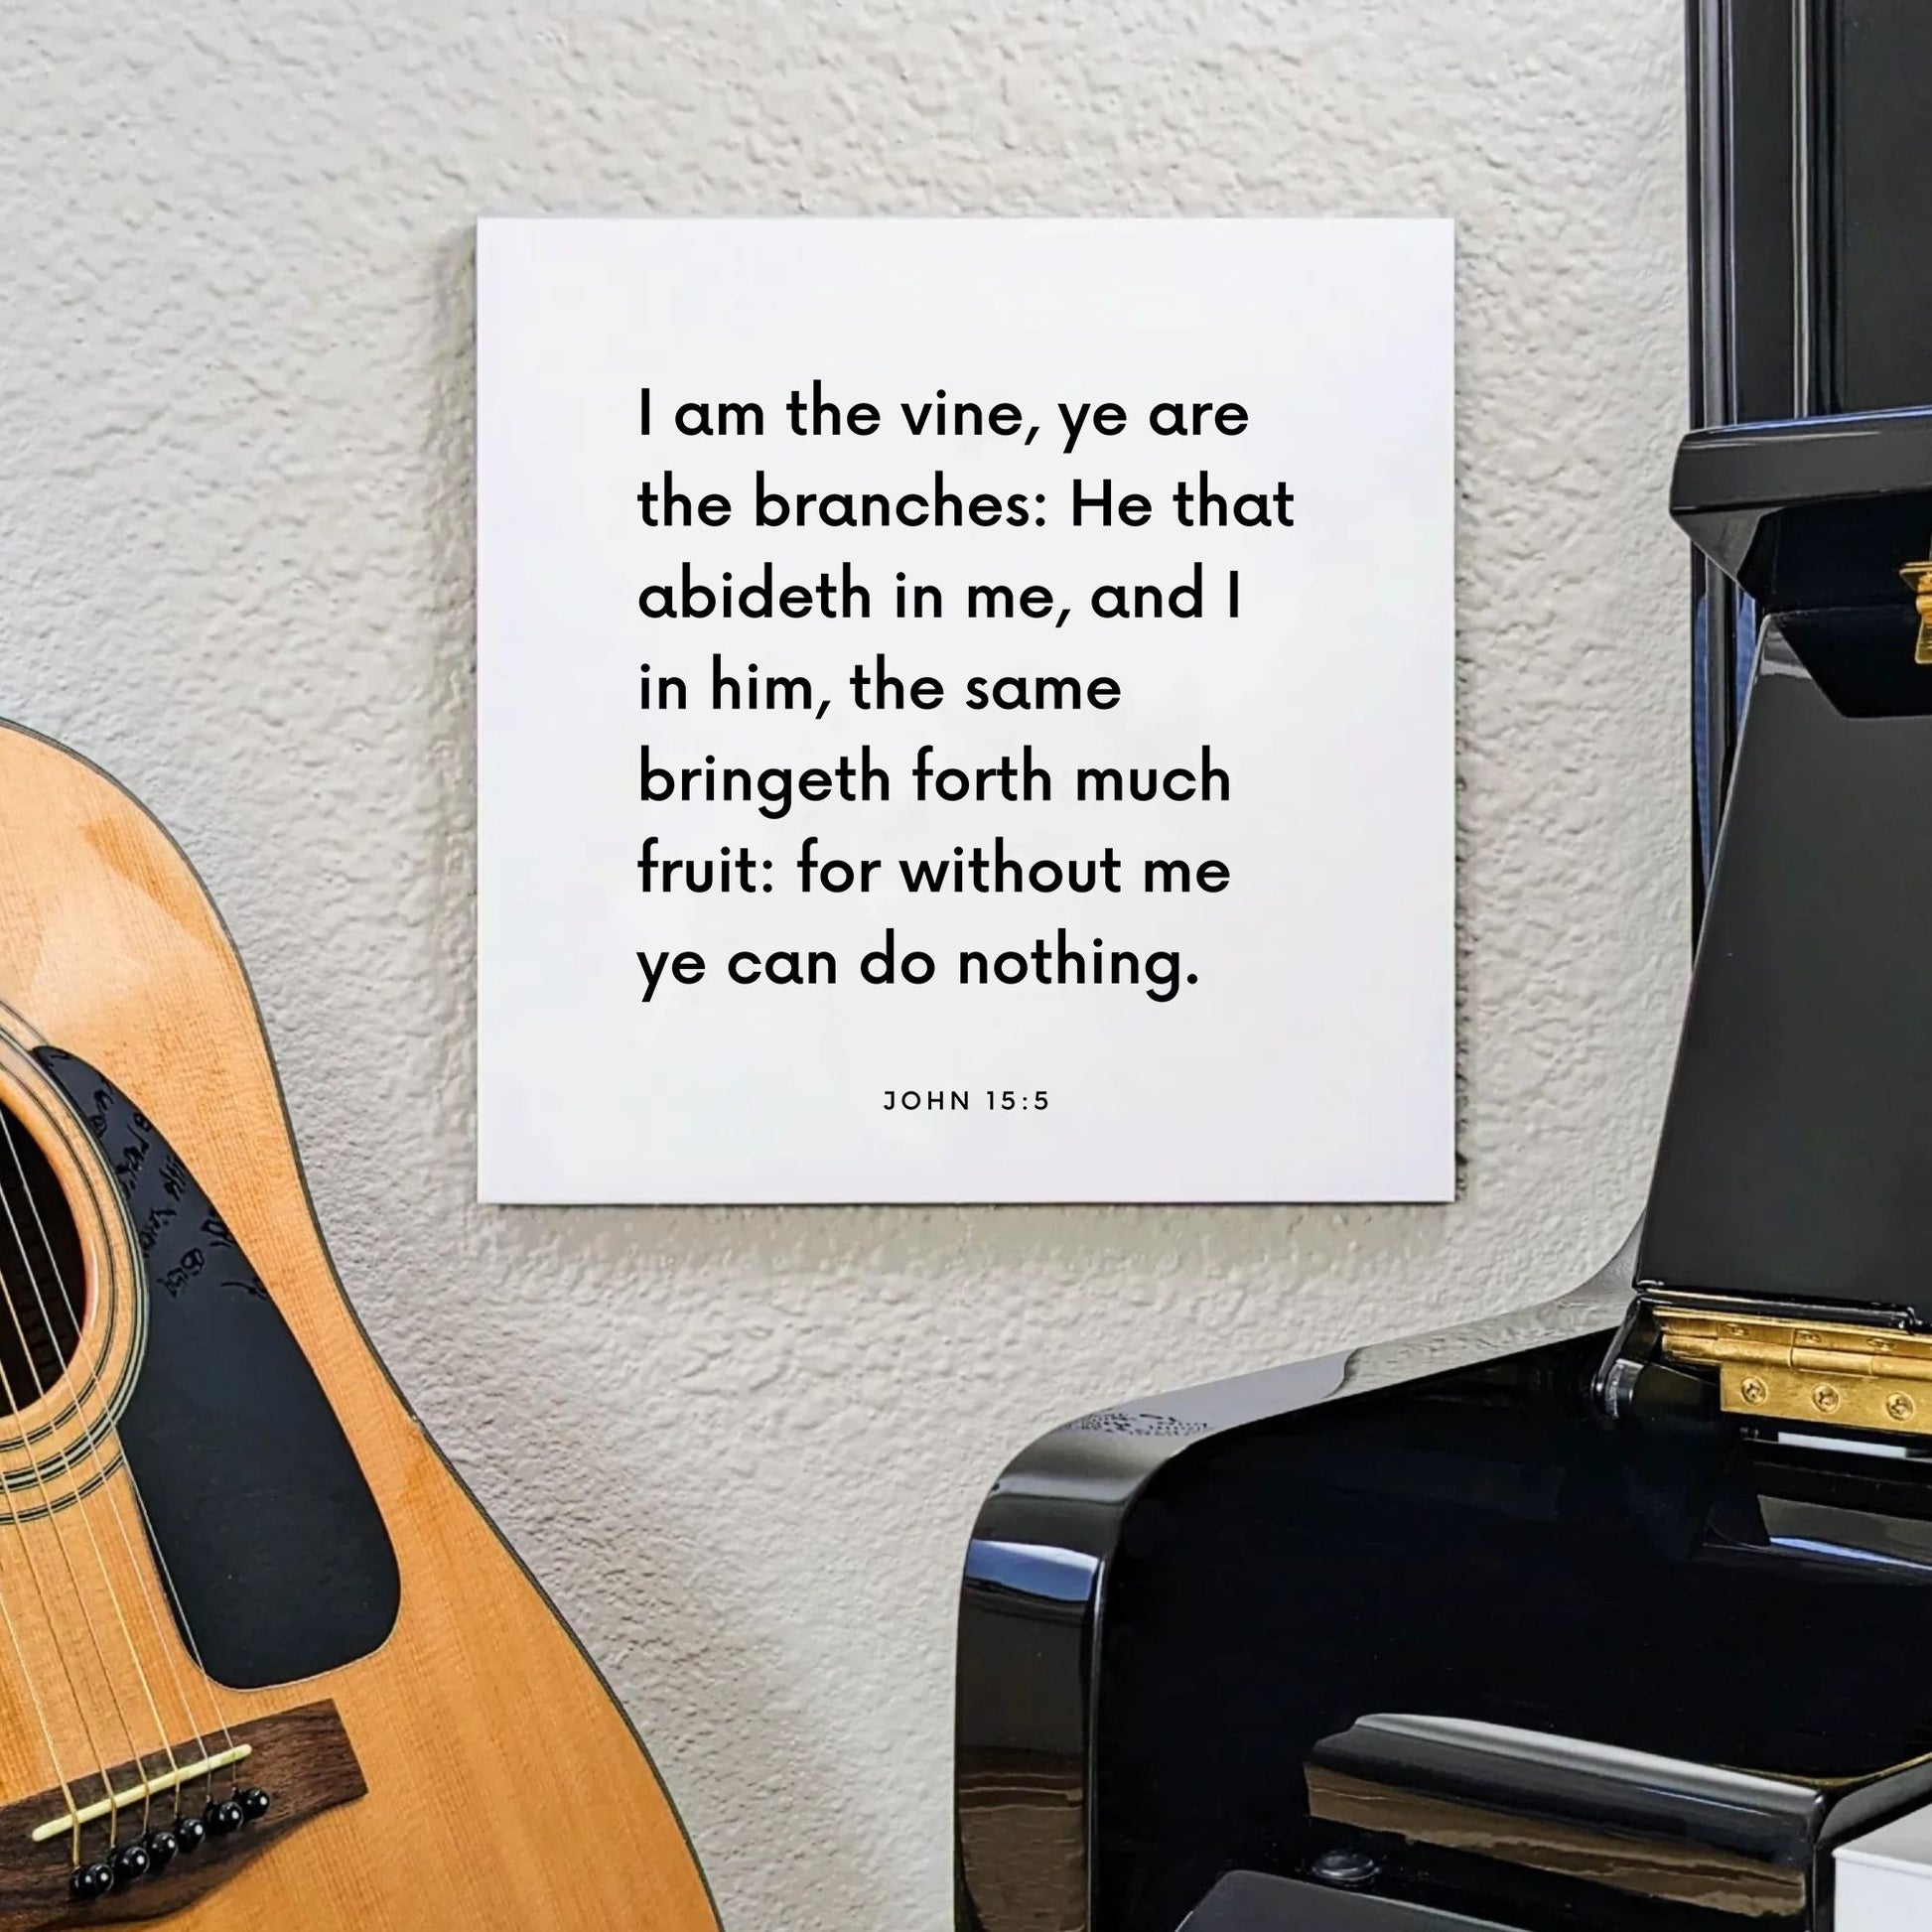 Music mouting of the scripture tile for John 15:5 - "I am the vine, ye are the branches"